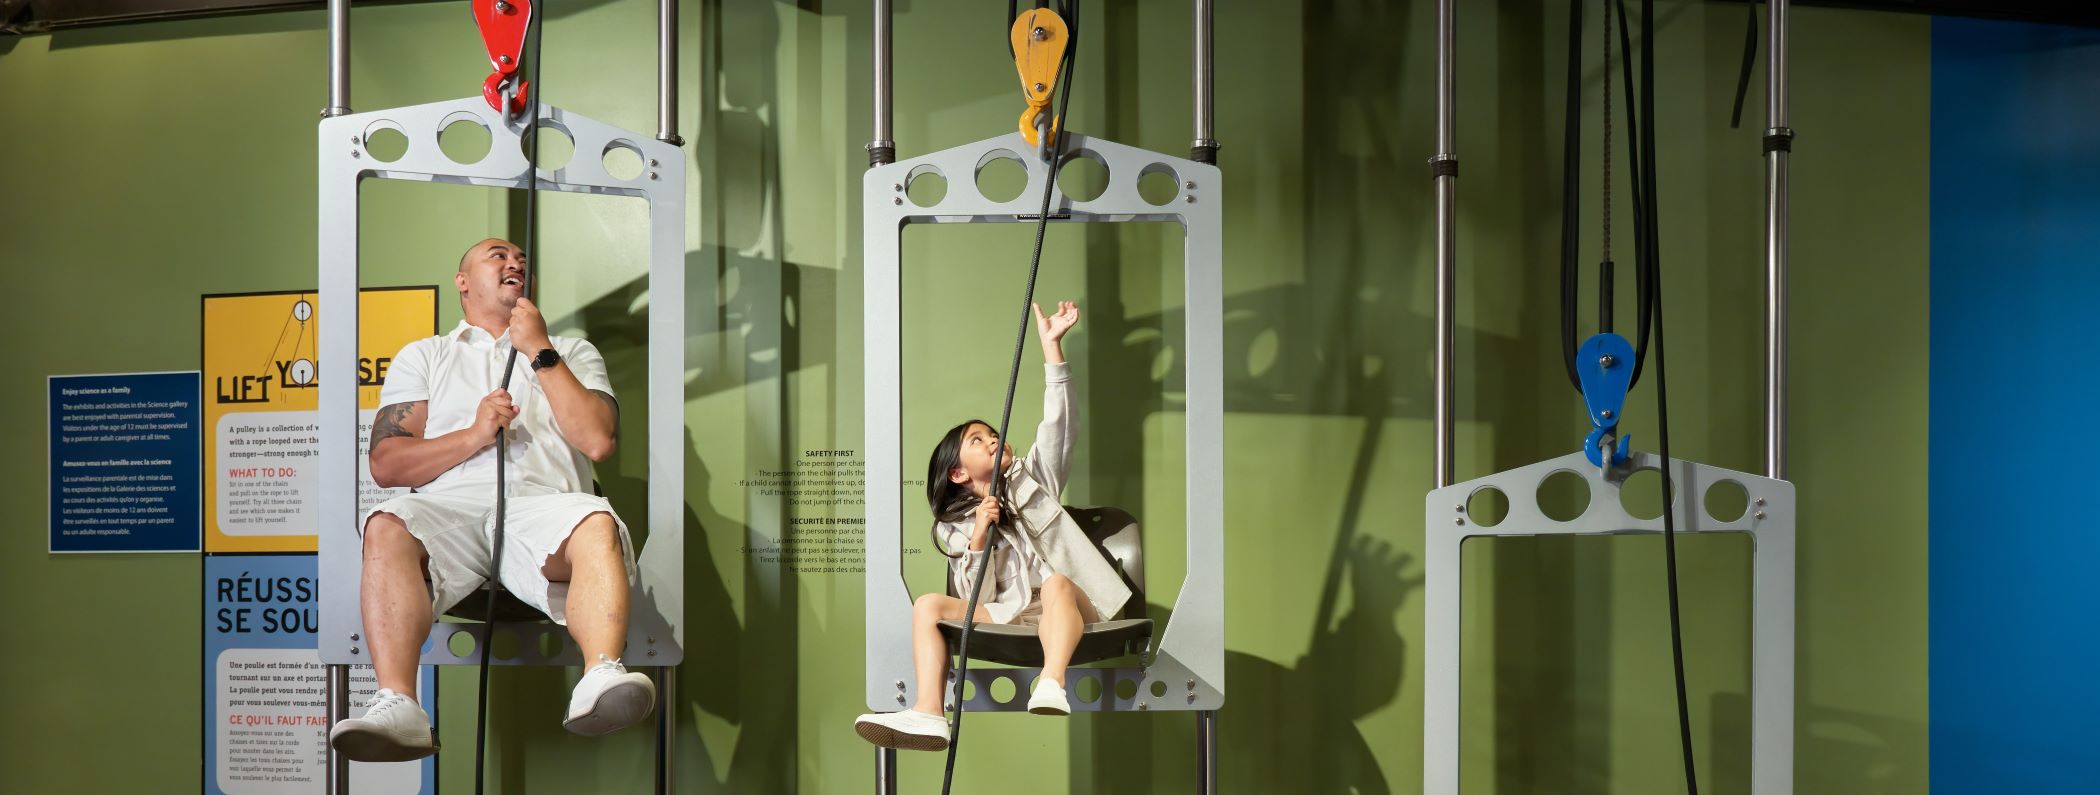 An adult and child race on the Pulley Chairs in the Manitoba Museum Science Gallery.